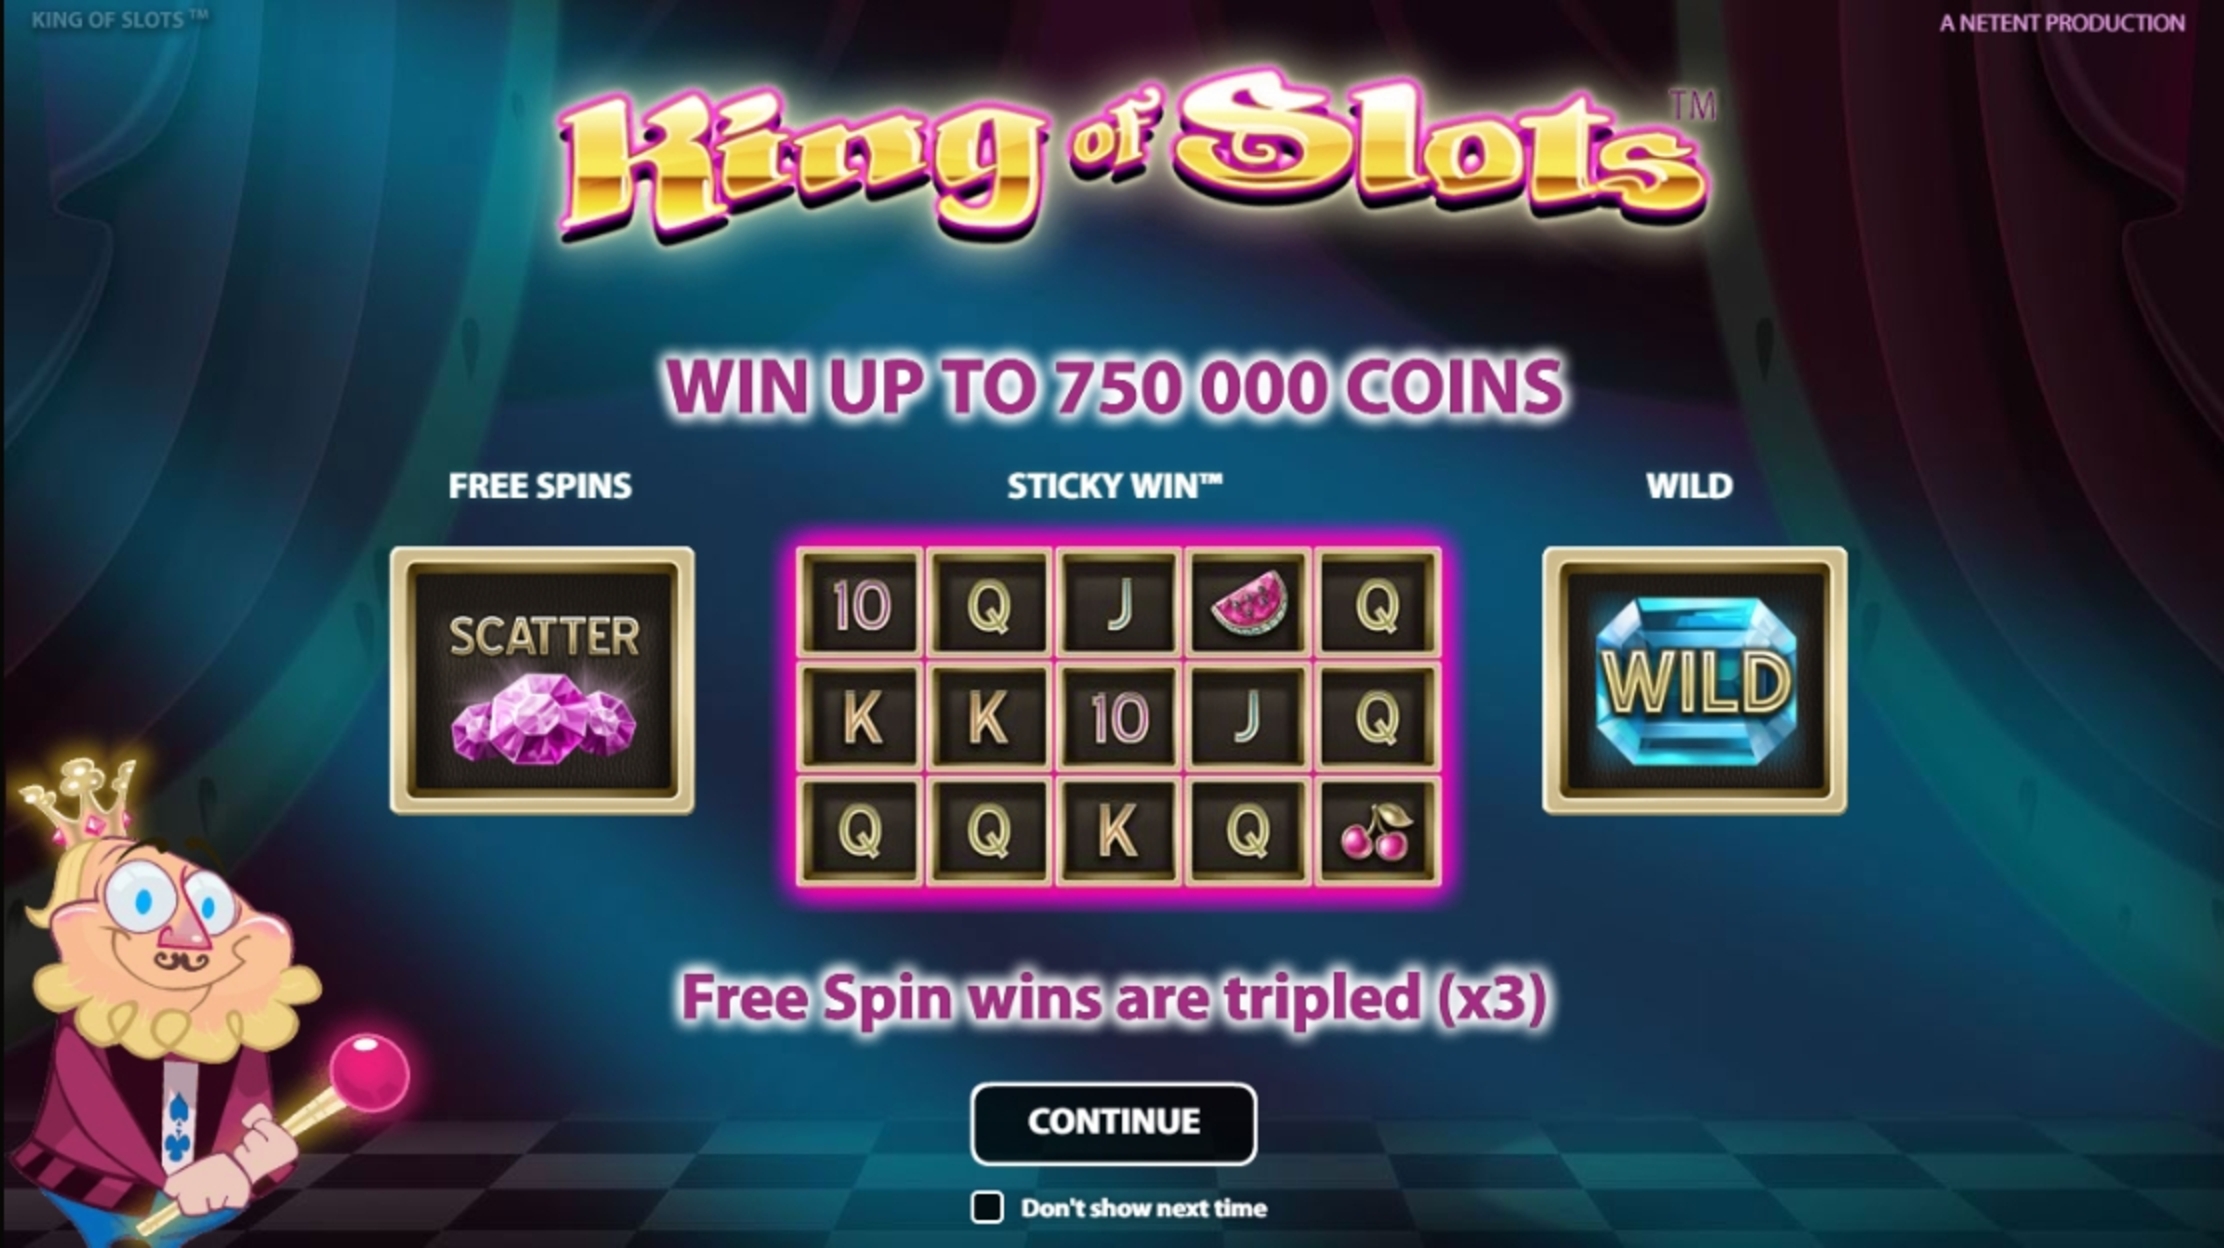 Play King of Slots Free Casino Slot Game by NetEnt